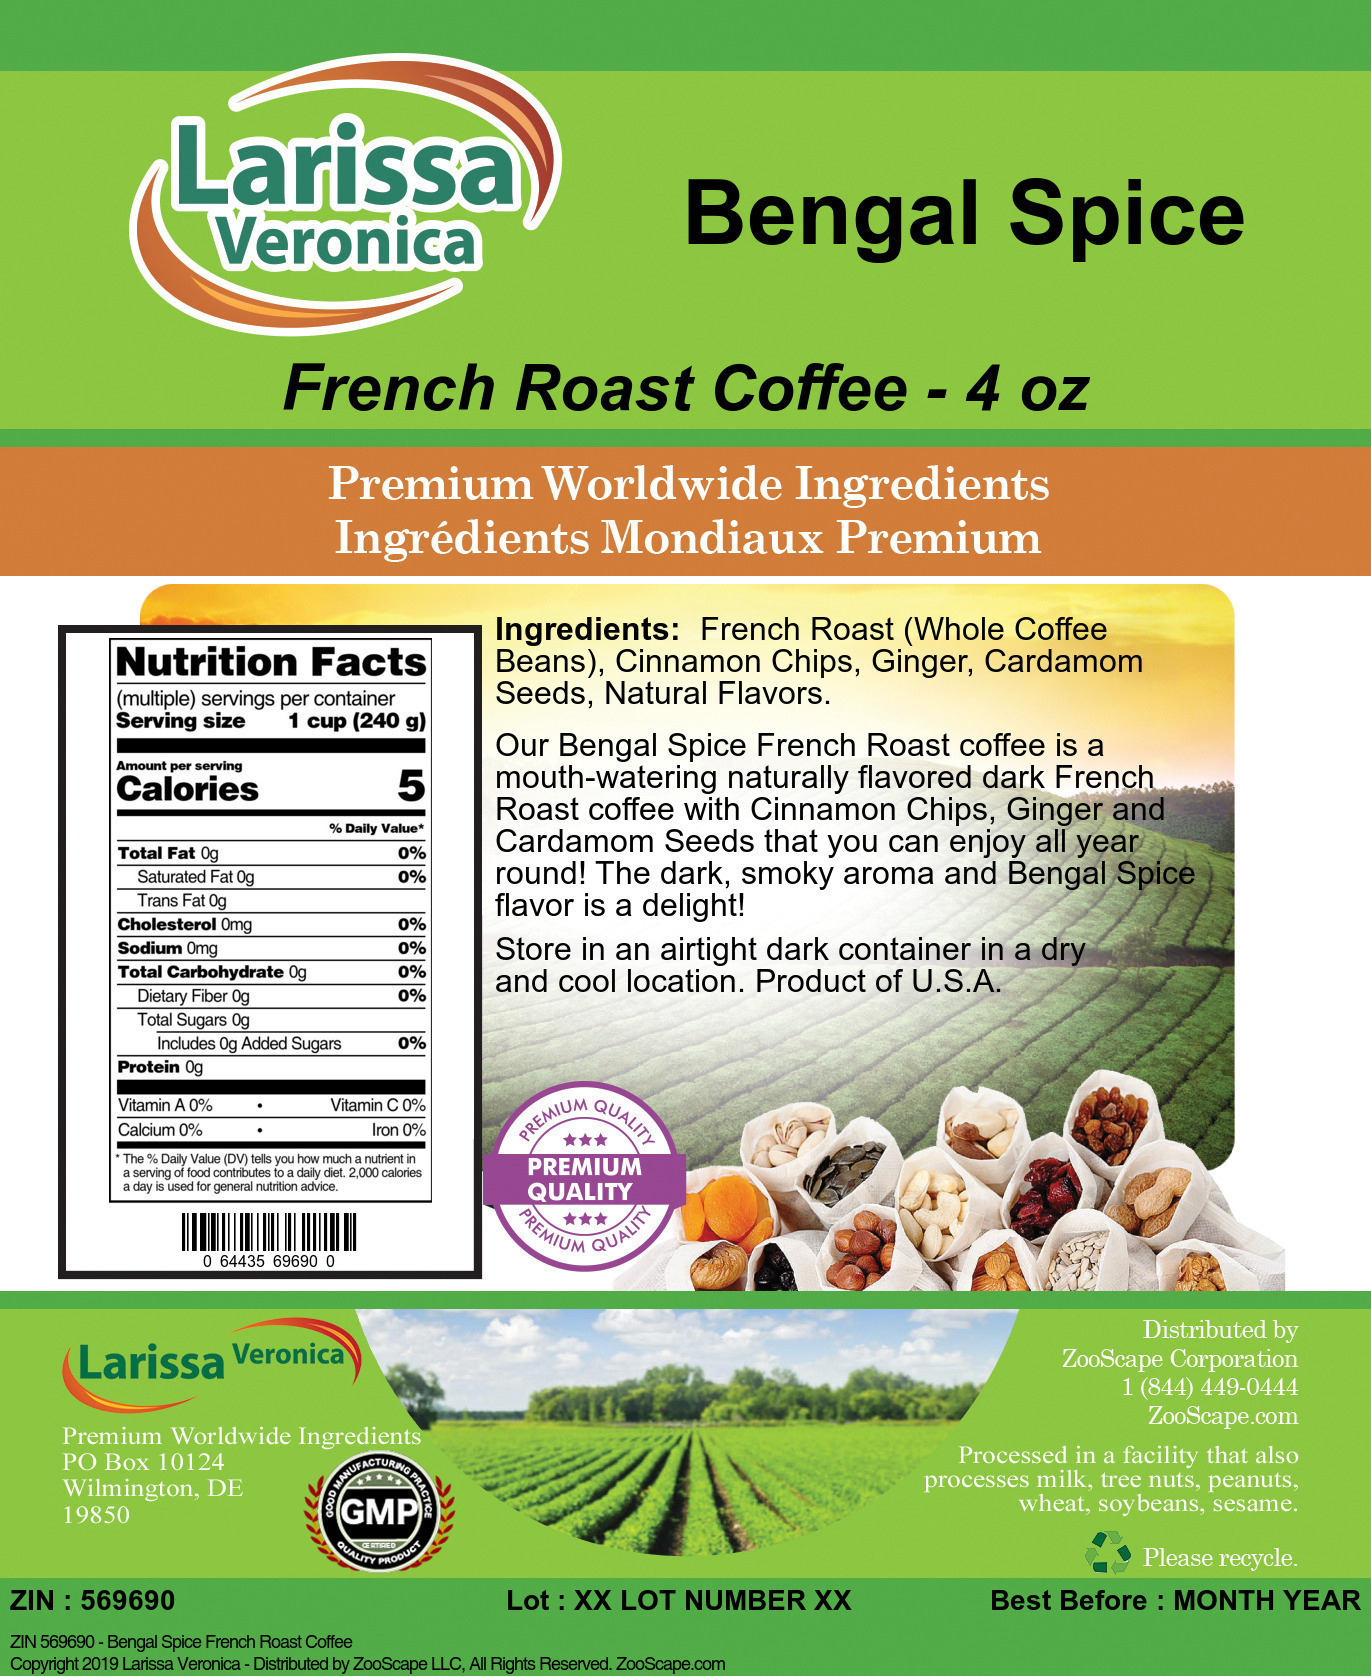 Bengal Spice French Roast Coffee - Label